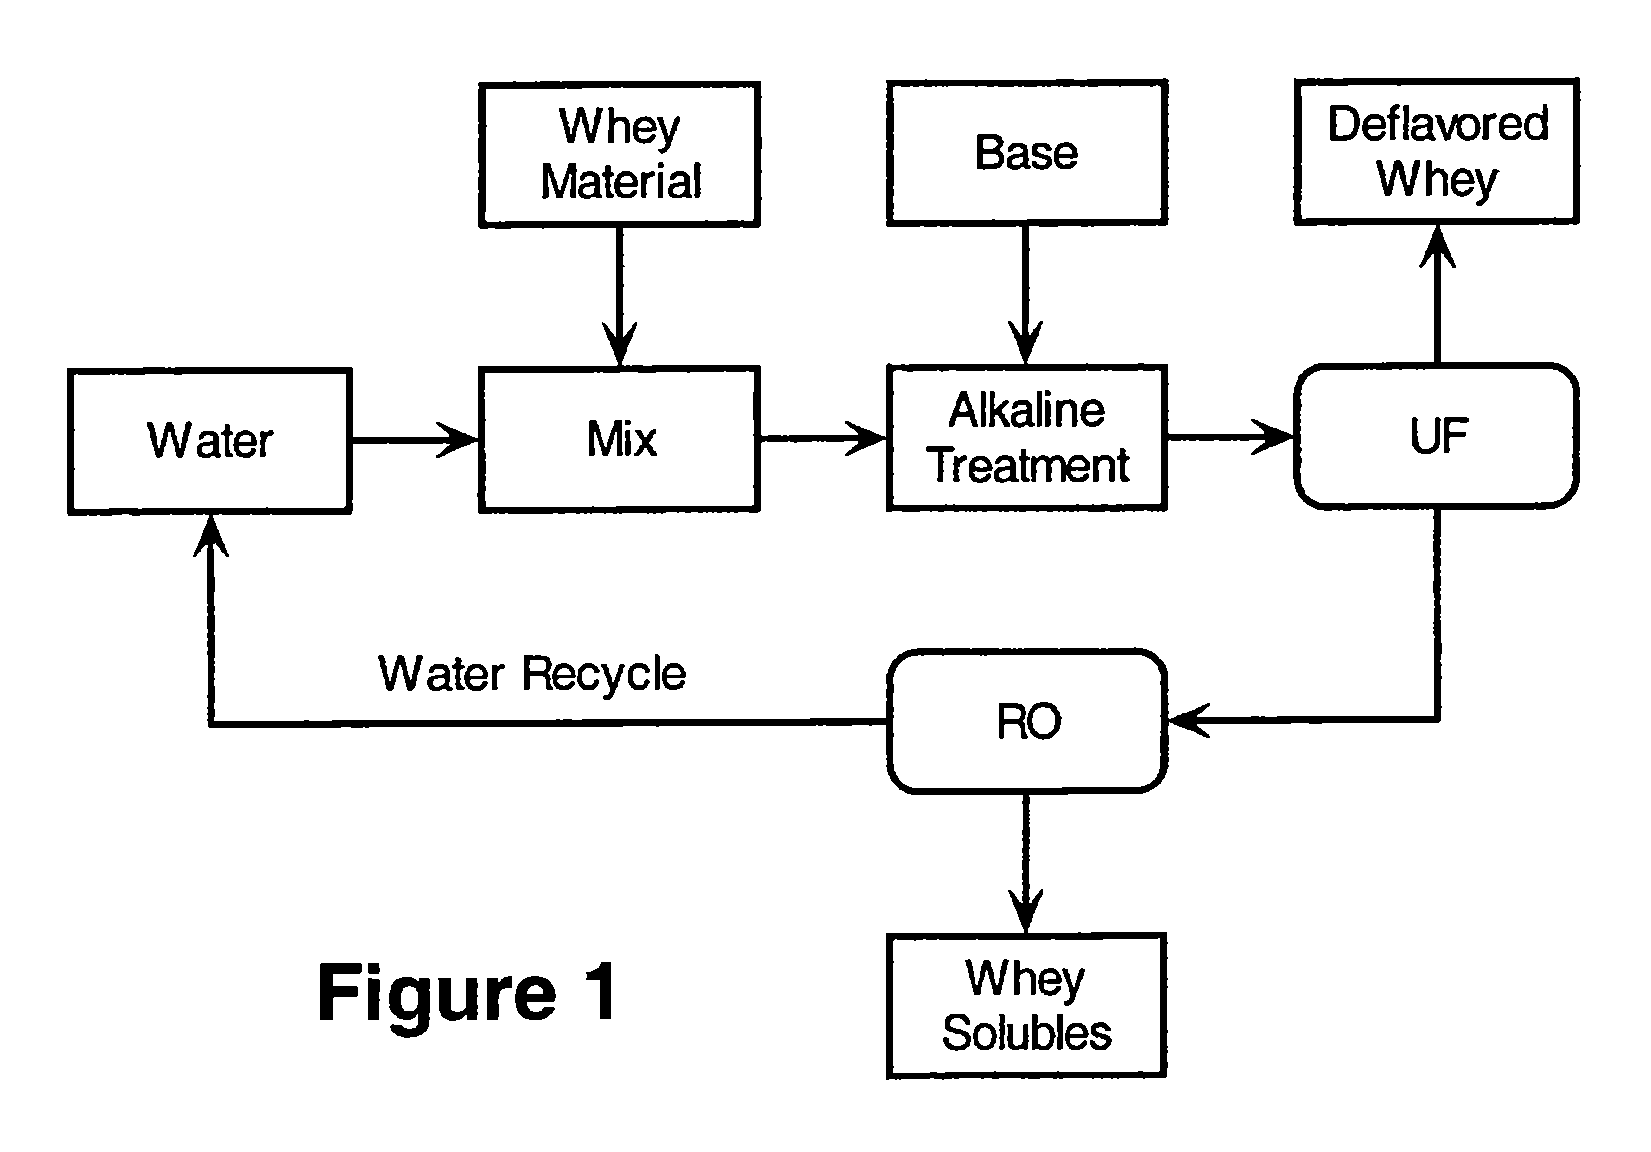 Whey-contaiing food product and method of deflavoring whey protein